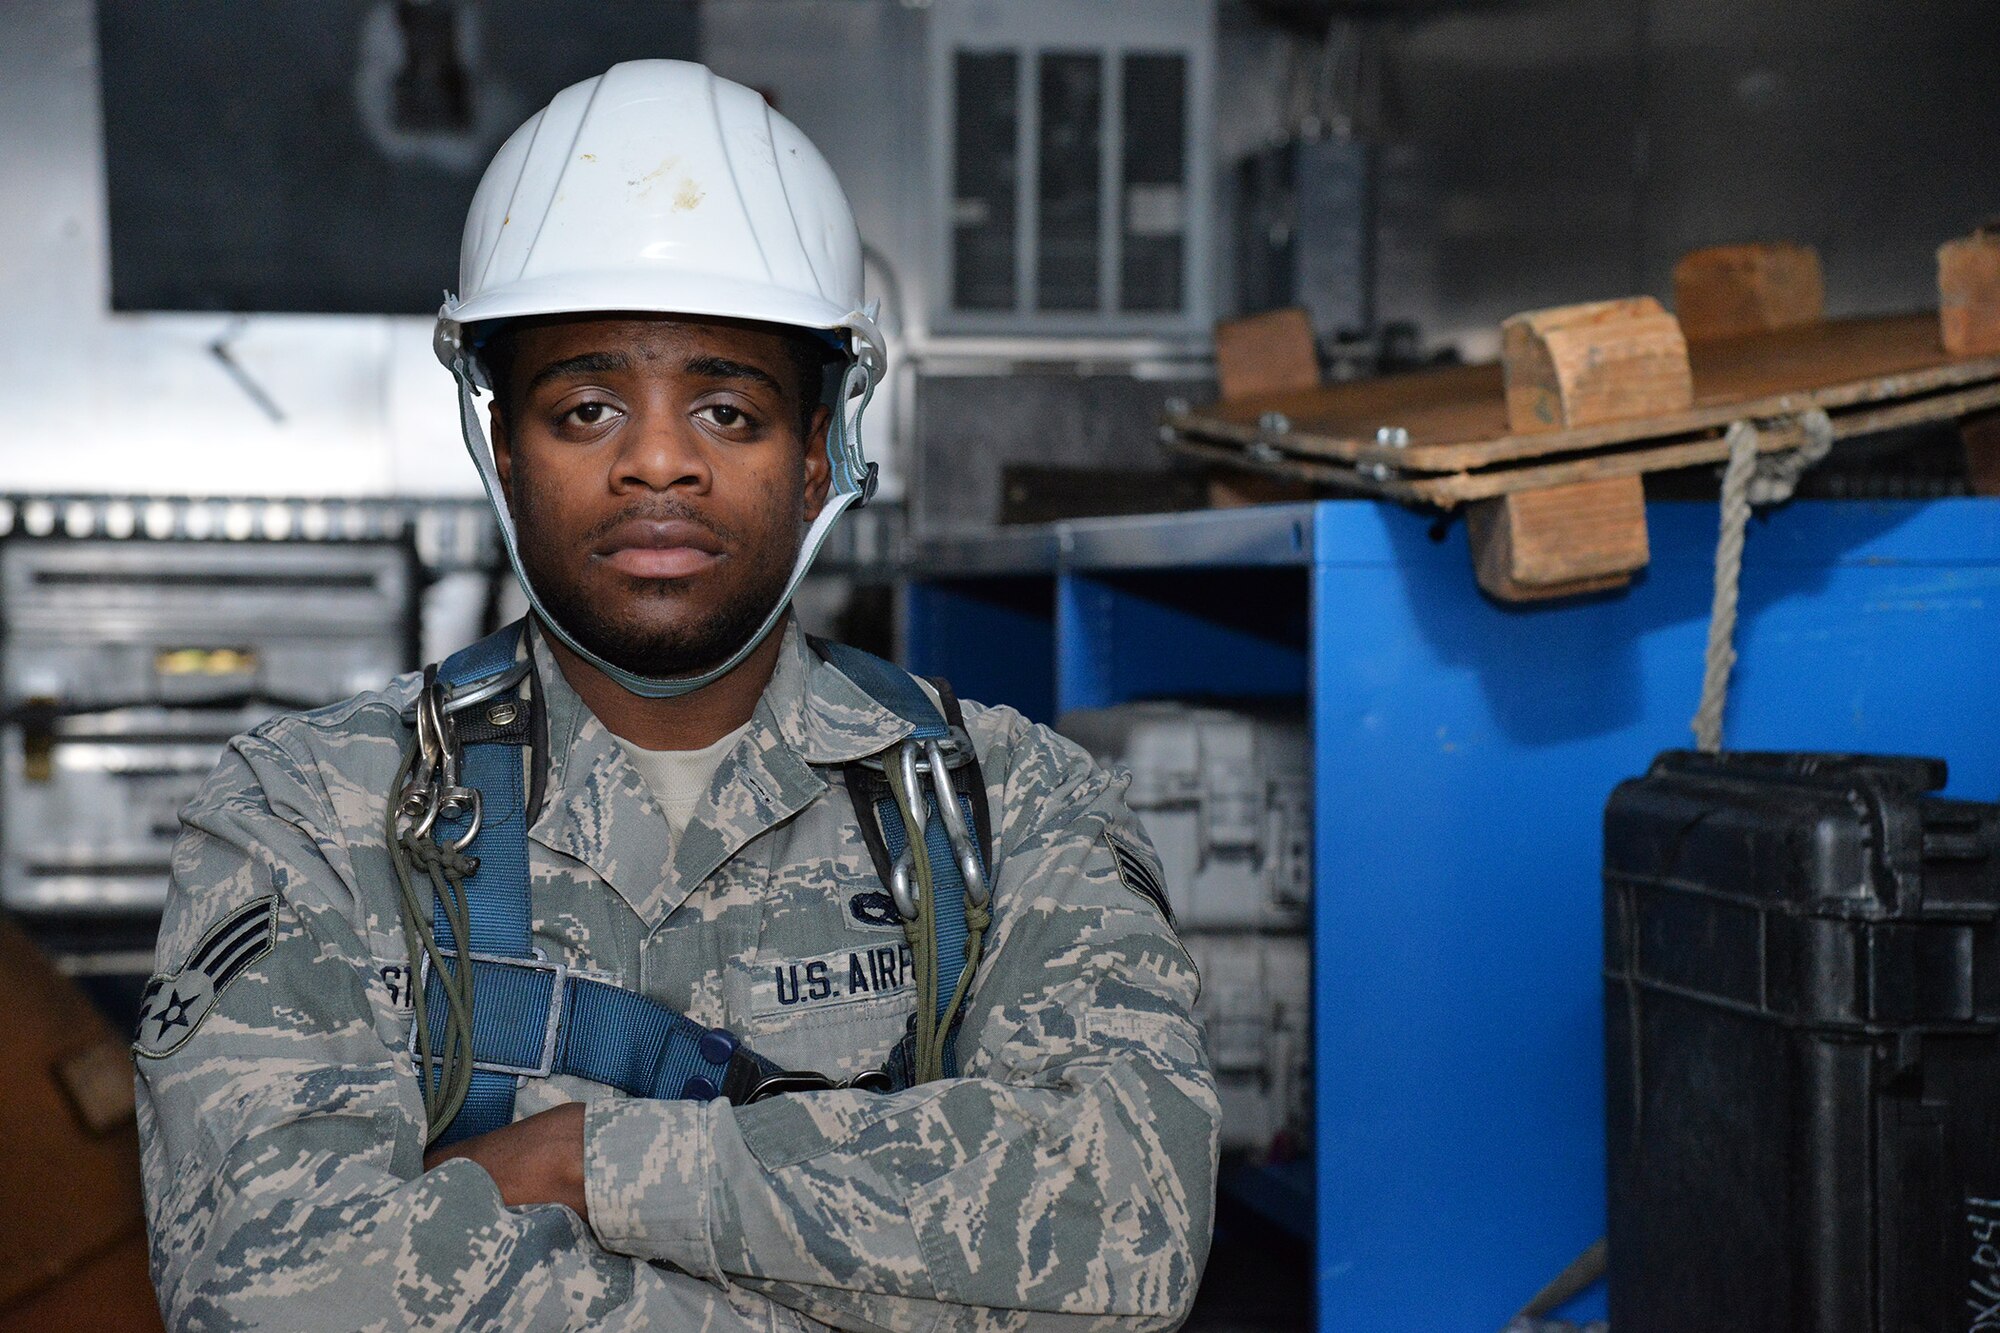 Senior Airman Shaquille Stephens, 341st Missile Maintenance Squadron maintenance technician, poses for a photo Jan. 17, 2017, at Malmstrom Air Force Base, Mont. Stephens recently transferred from another maintenance shop and is learning missile maintenance duties while awaiting additional training to become a field worker. (U.S. Air Force photo/Airman 1st Class Daniel Brosam)